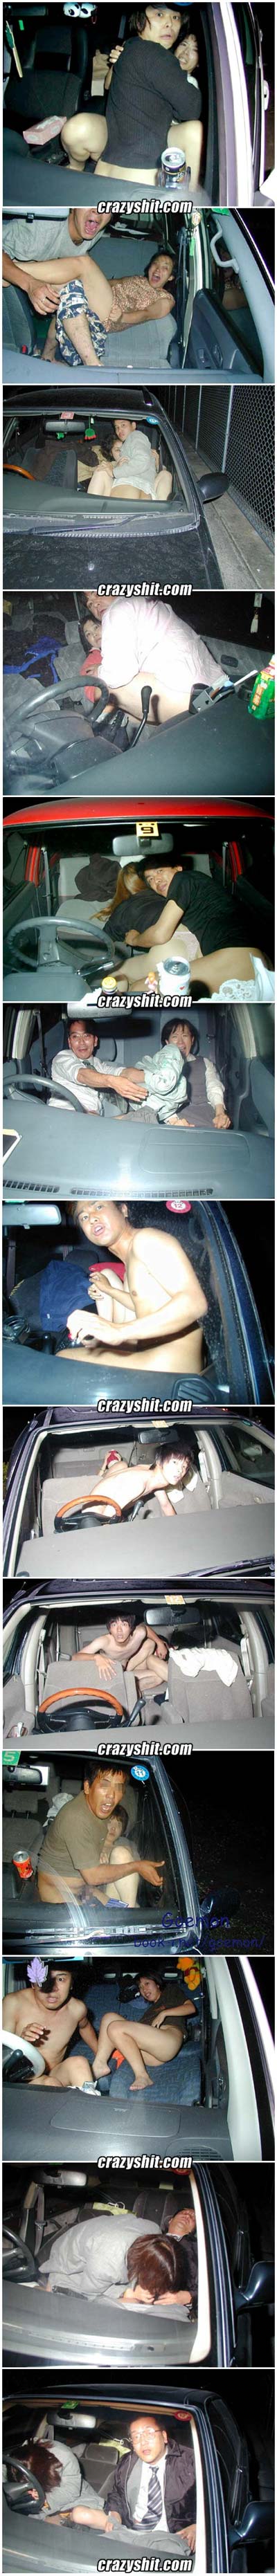 Nothing Funnier Than Asians Getting Busted